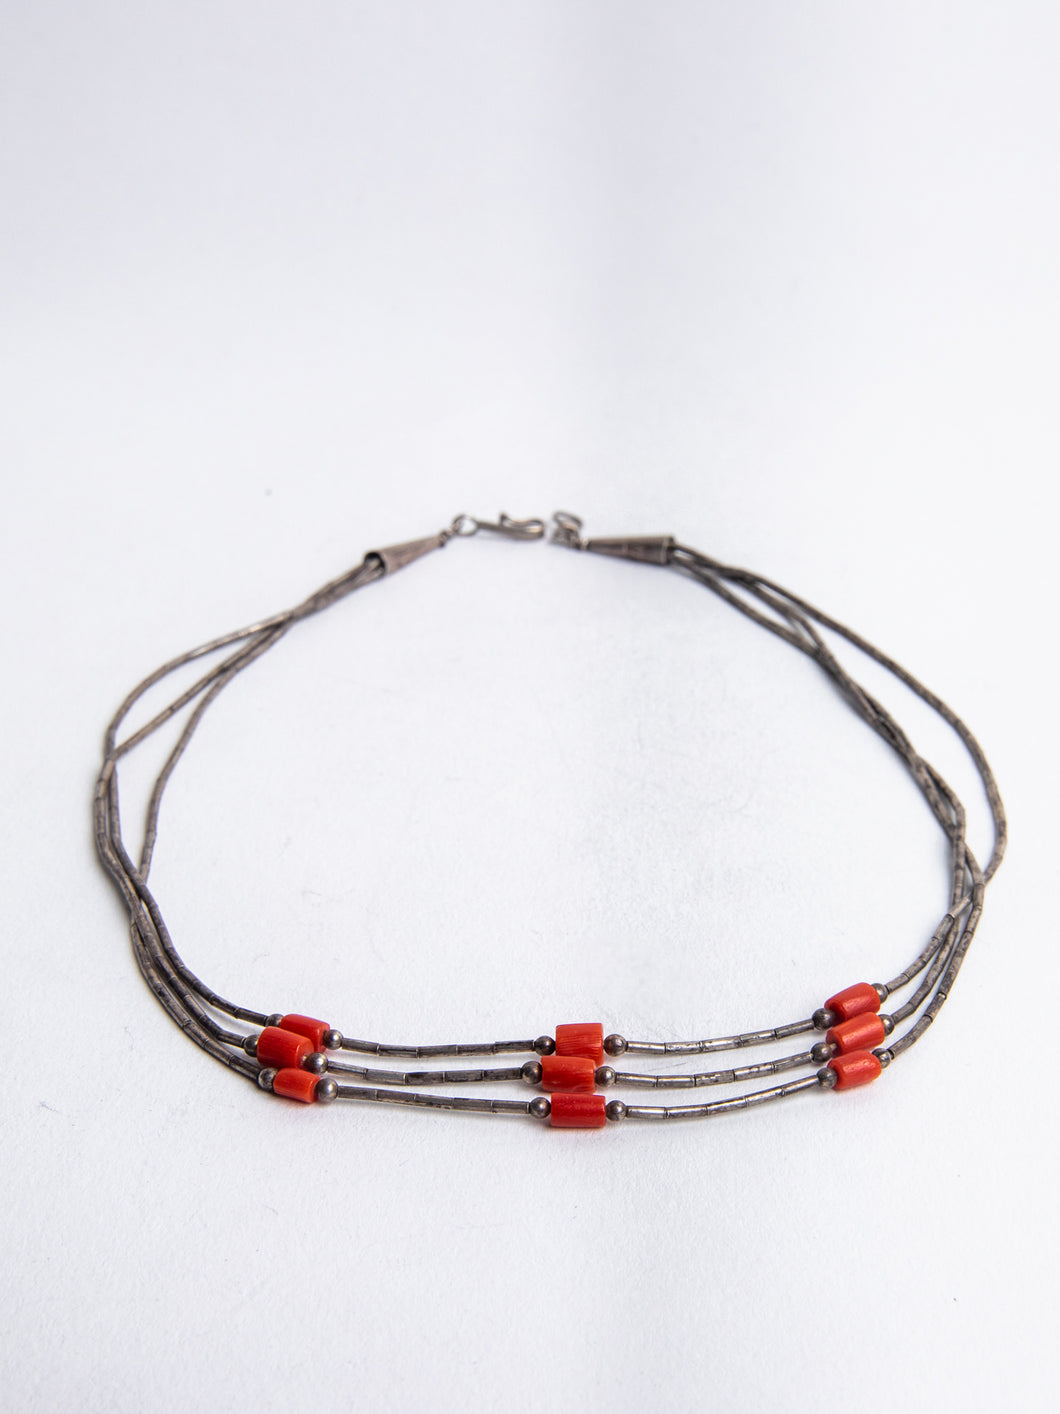 Vintage Sterling Silver and Coral Necklace